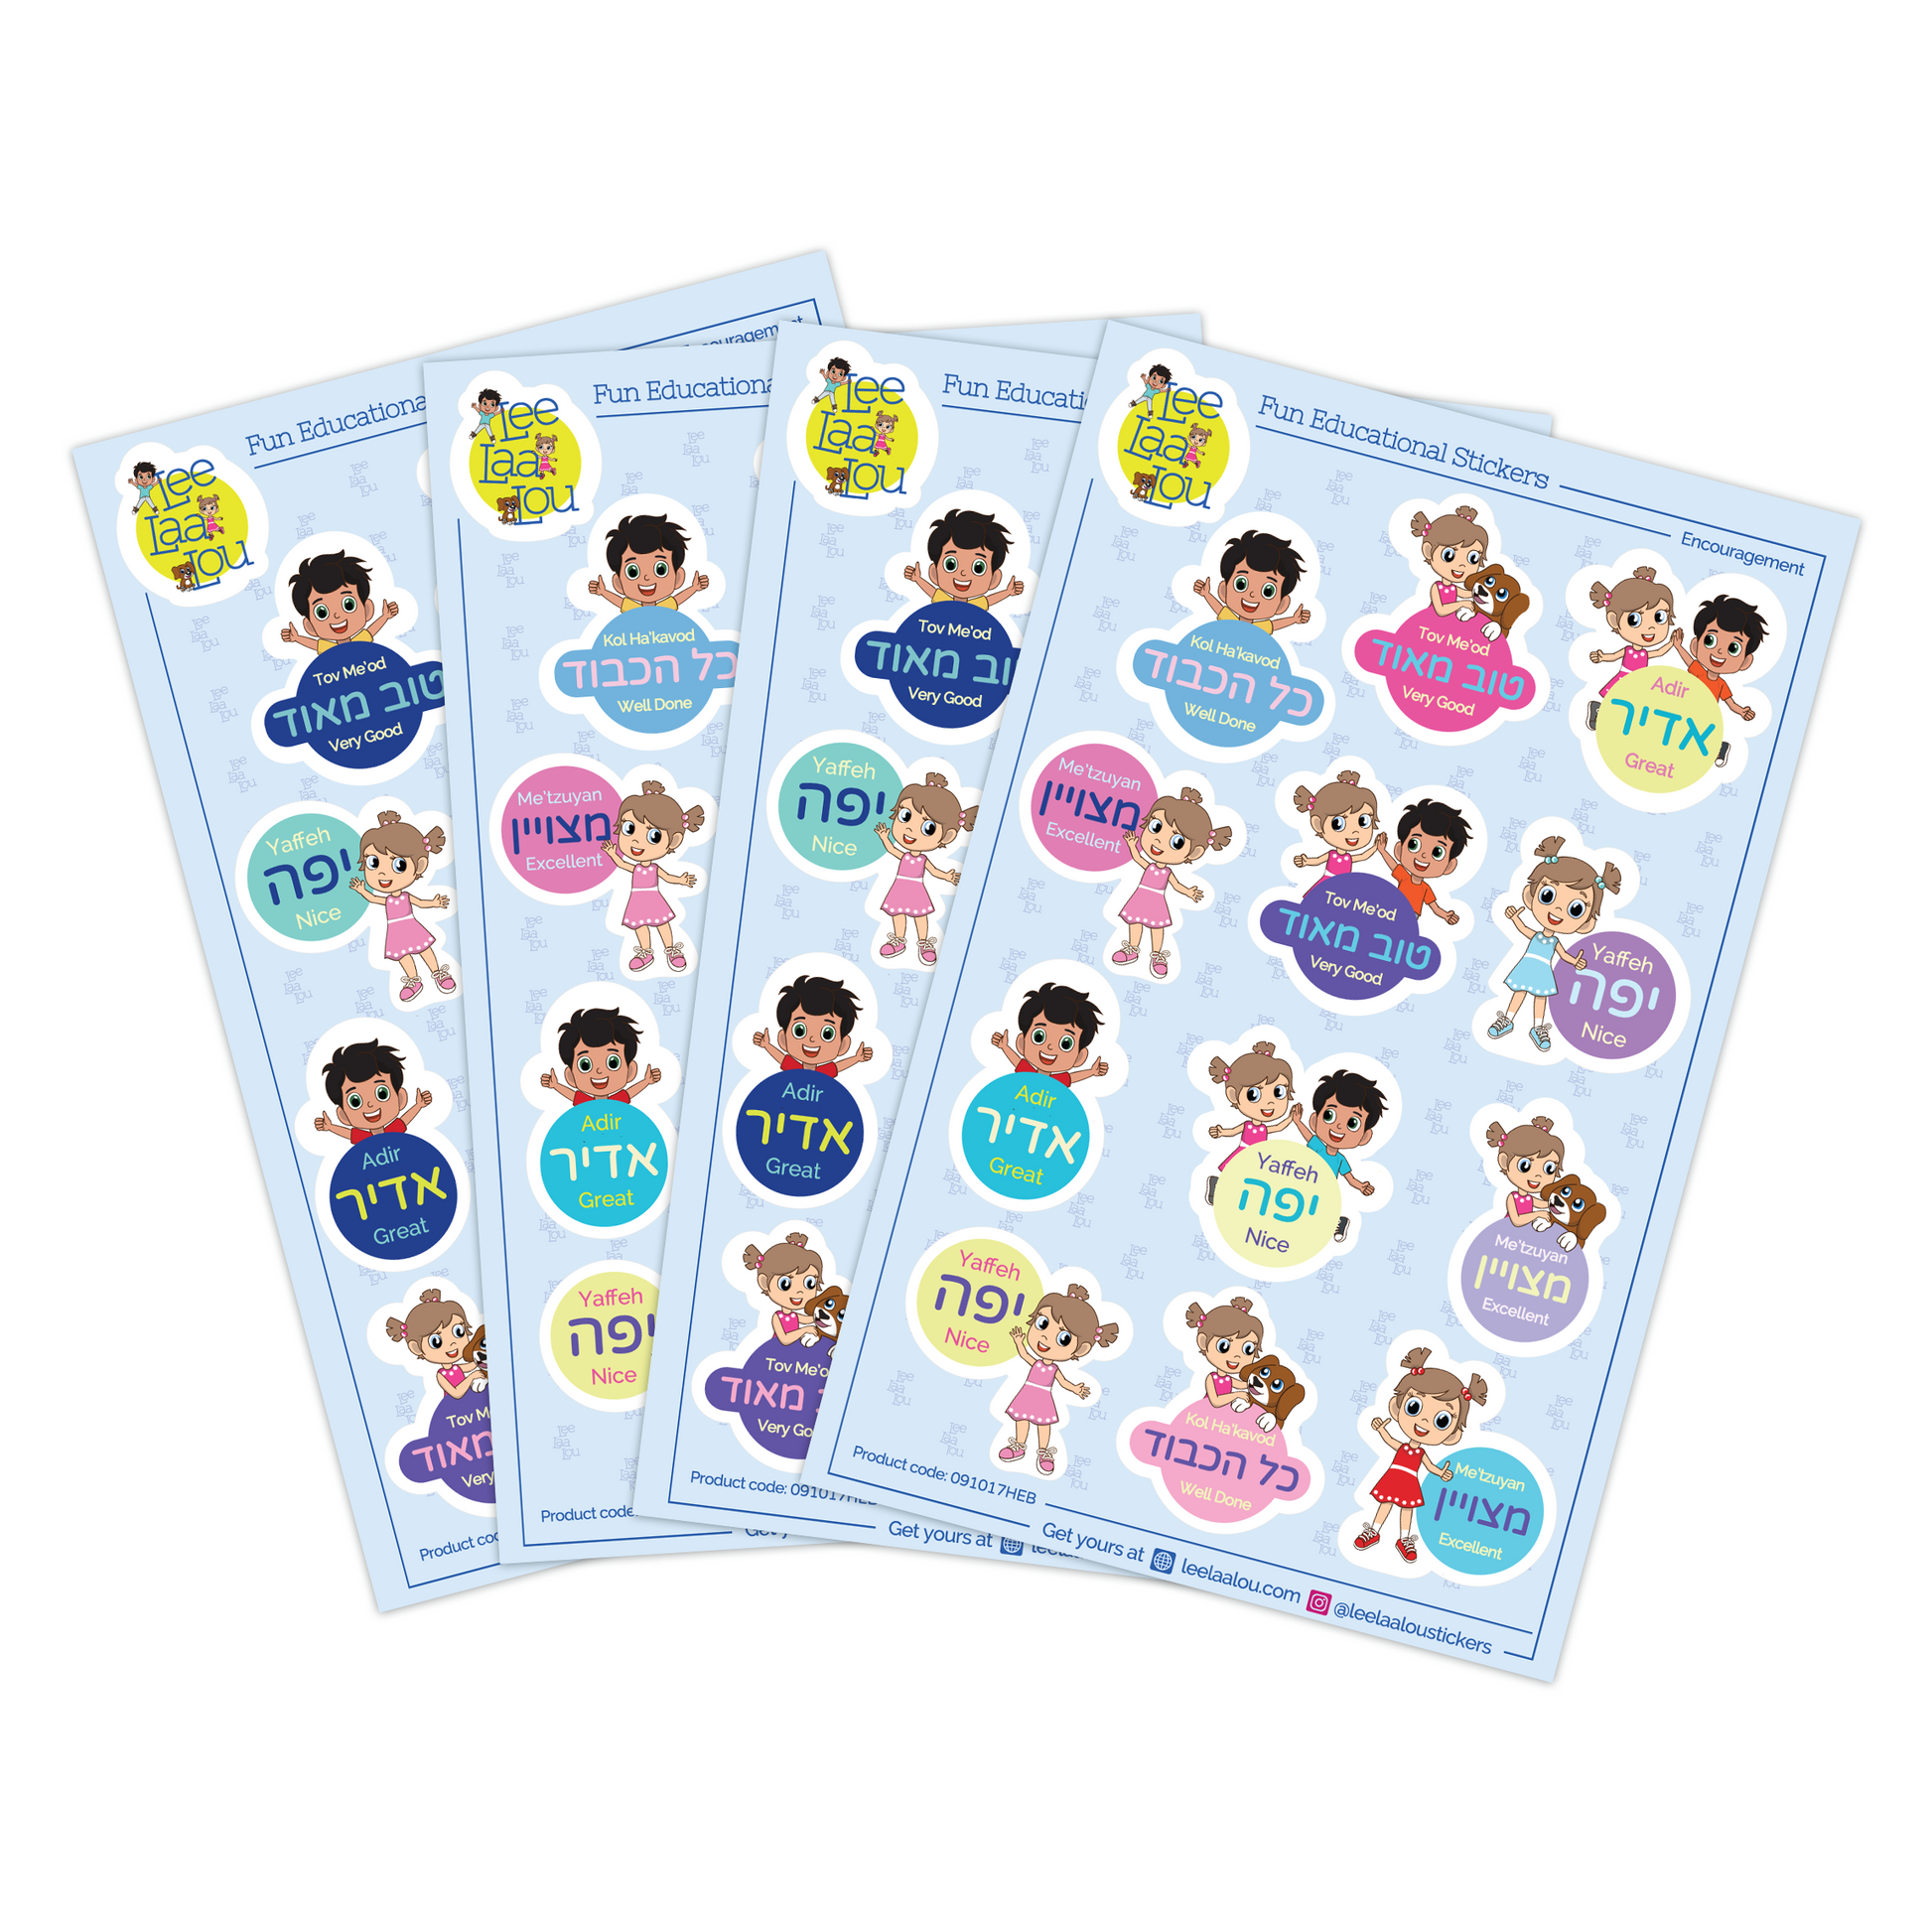 Hebrew Encouragement stickers for classroom. Learn Hebrew. Package of 4 sheets of classroom encouragement stickers